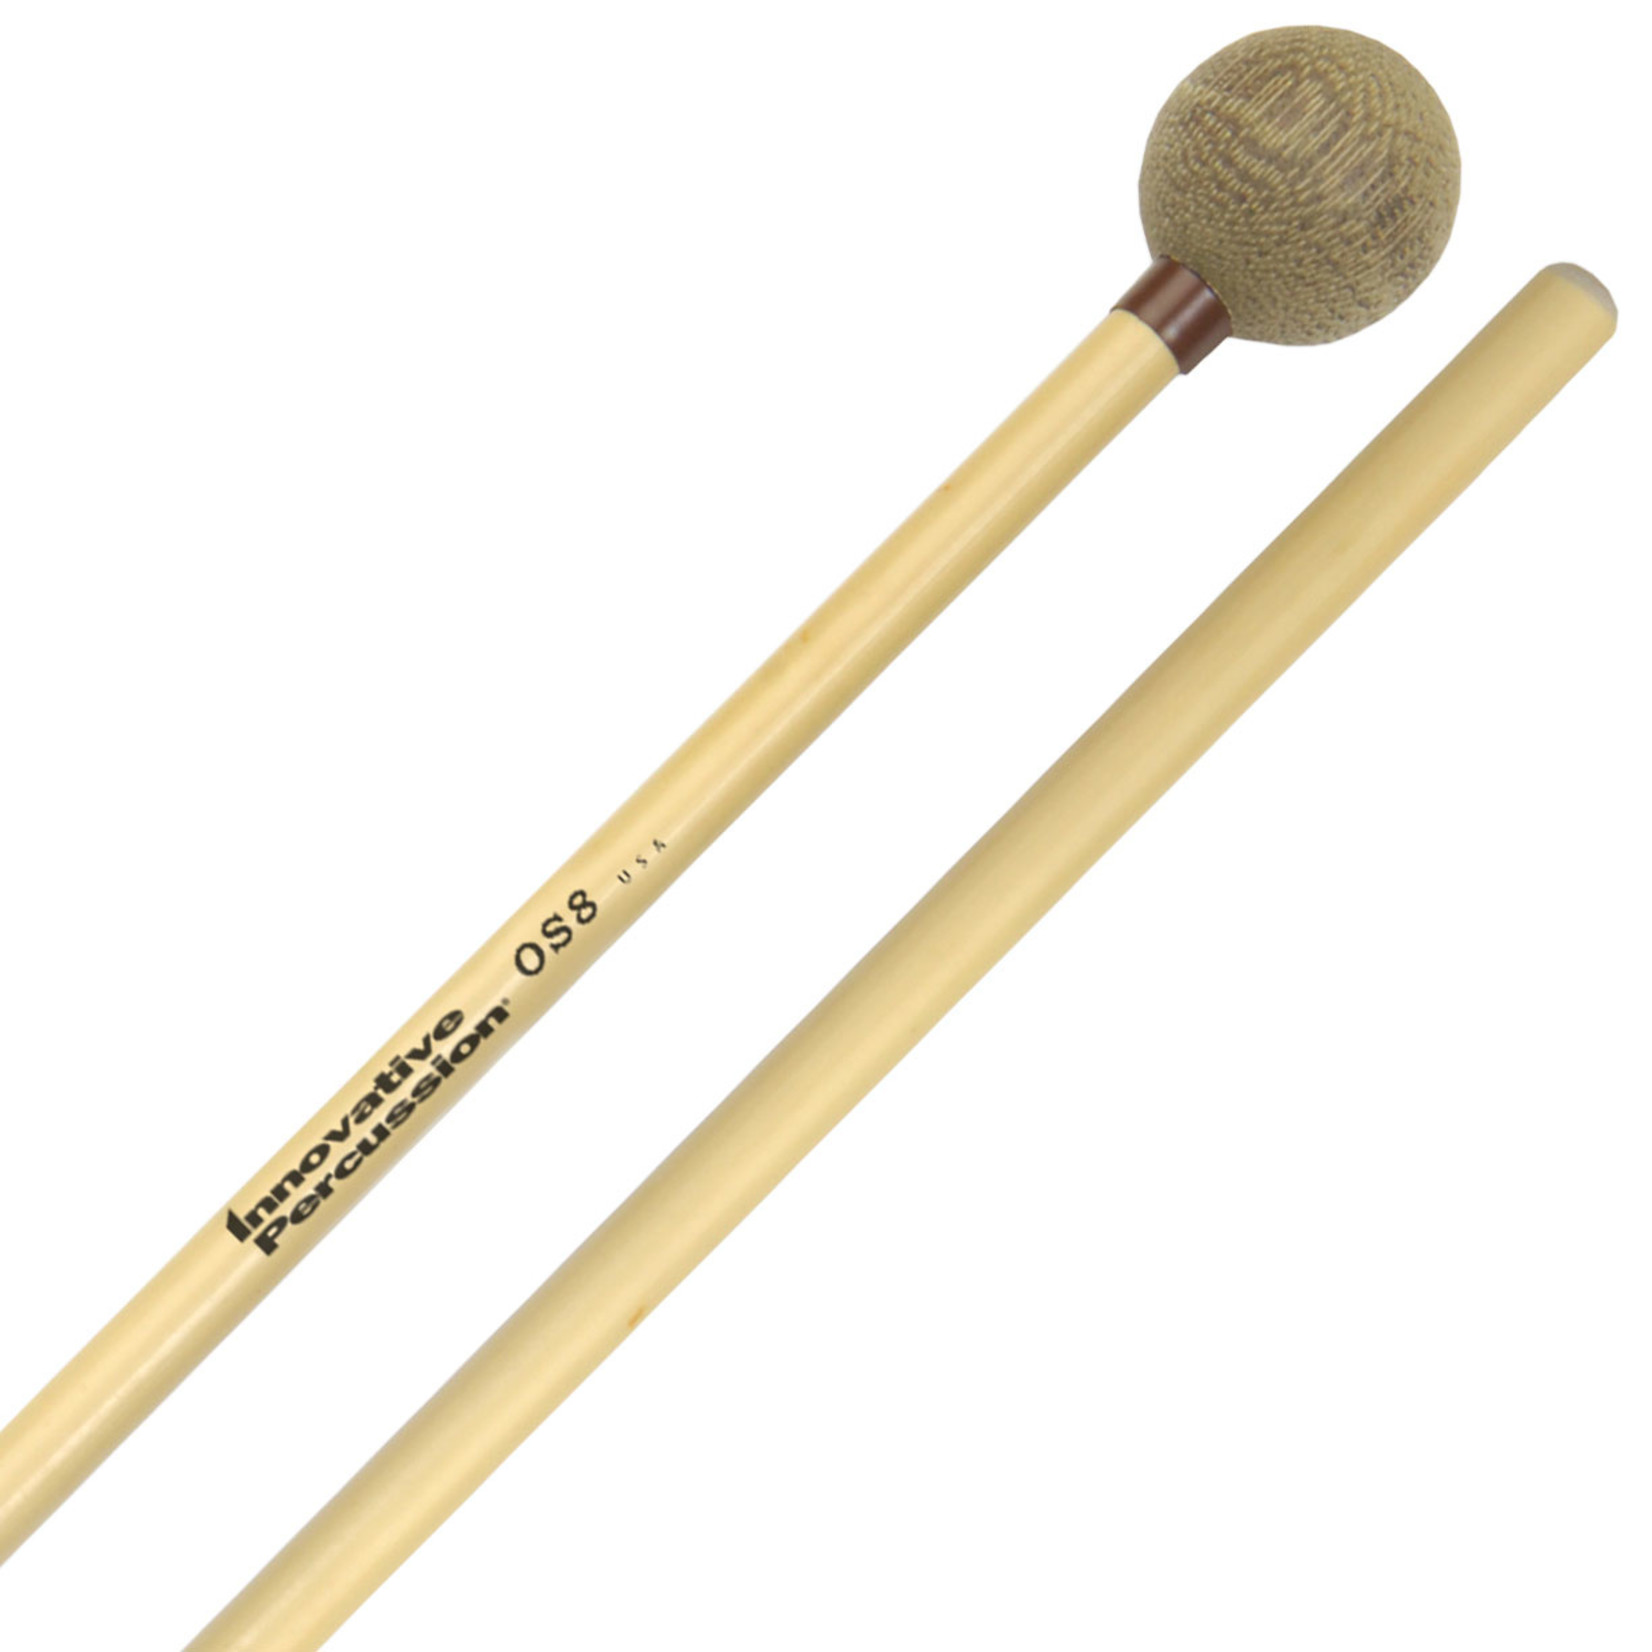 Innovative Percussion OS8 Orchestral Series LARGE GLOCKENSPIEL / XYLOPHONE MALLETS, EXTREMELY BRIGHT